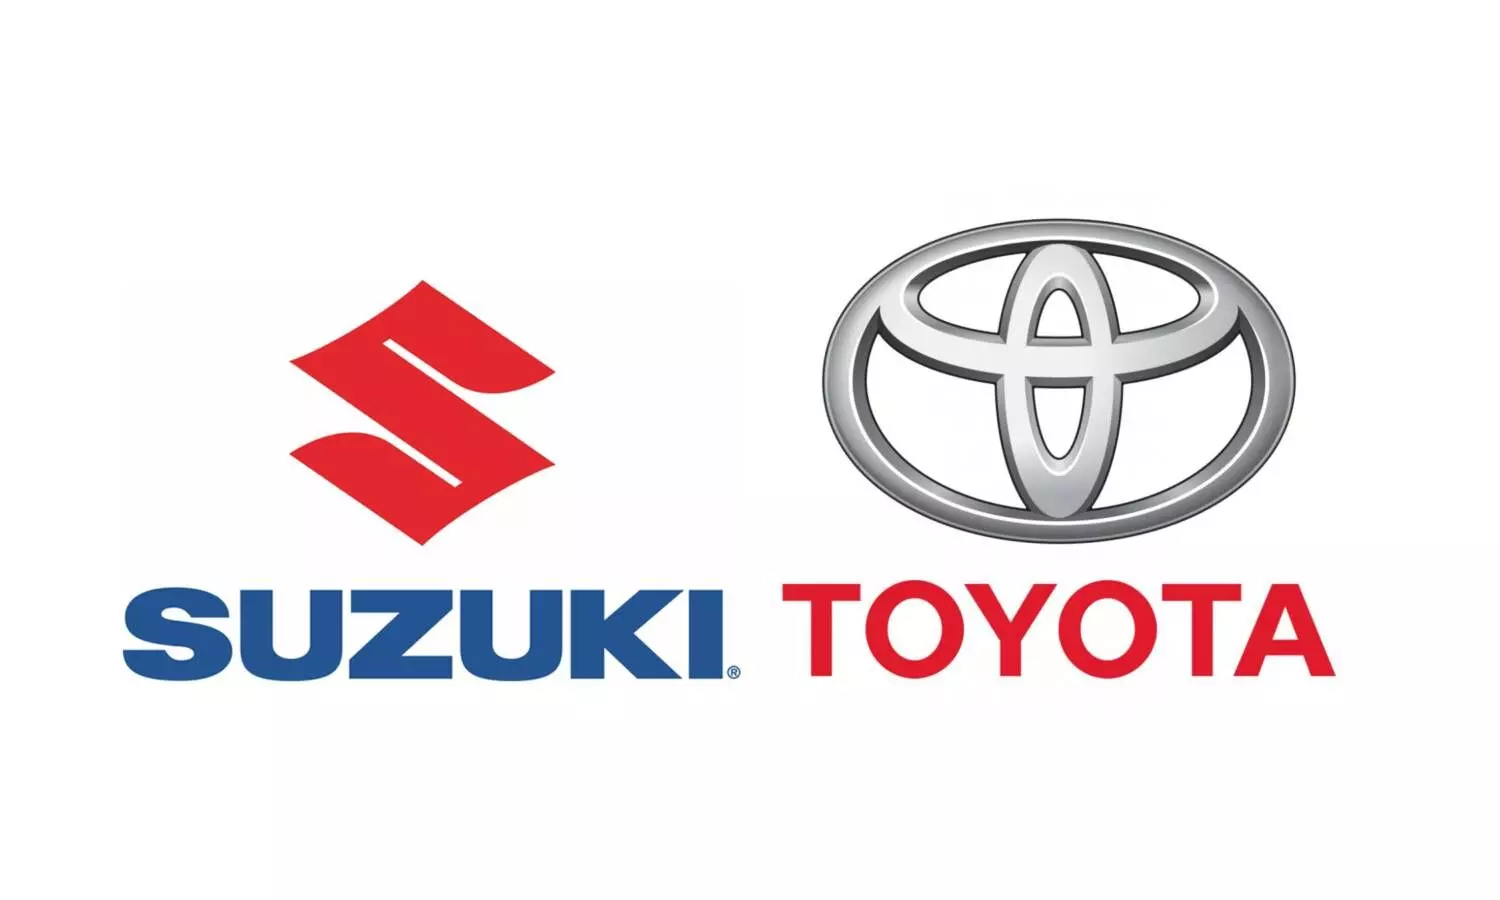 Top-7 most-awaited car launches from Maruti Suzuki &Toyota